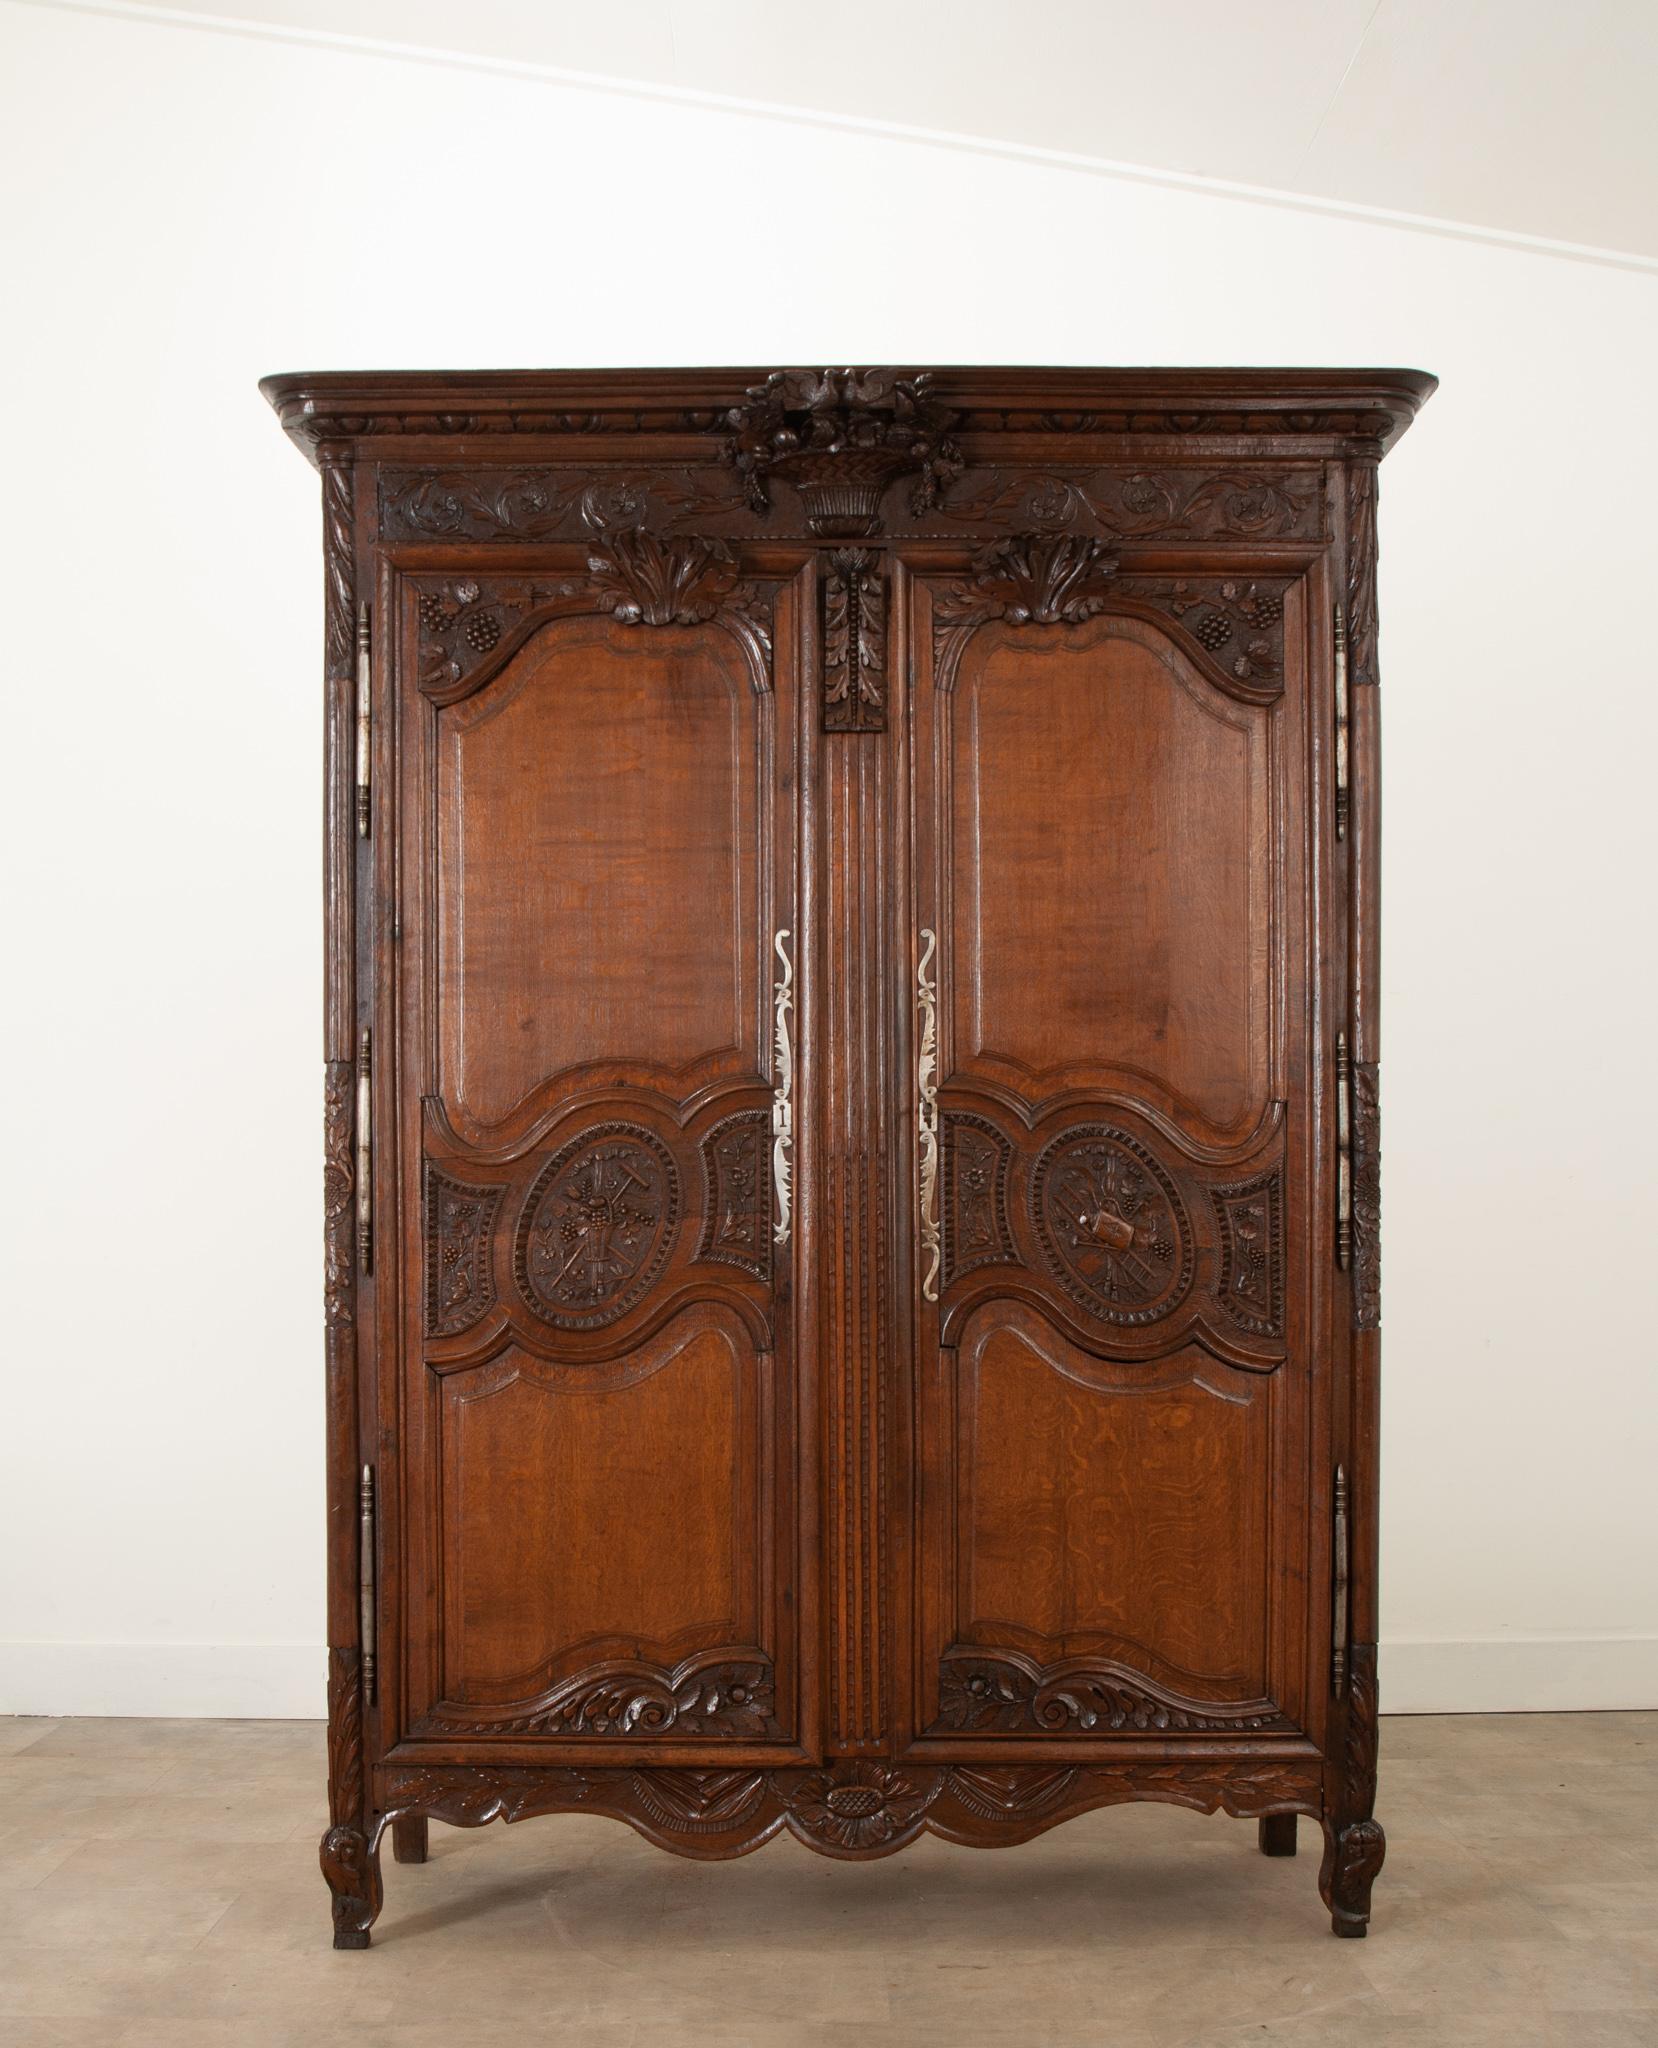 This stunning armoire de mariage was crafted in France during the 1800s from richly toned solid oak. The ornately carved motifs represent the wishes of wealth and prosperity for the new couple. The cornice has an impressively carved woven basket